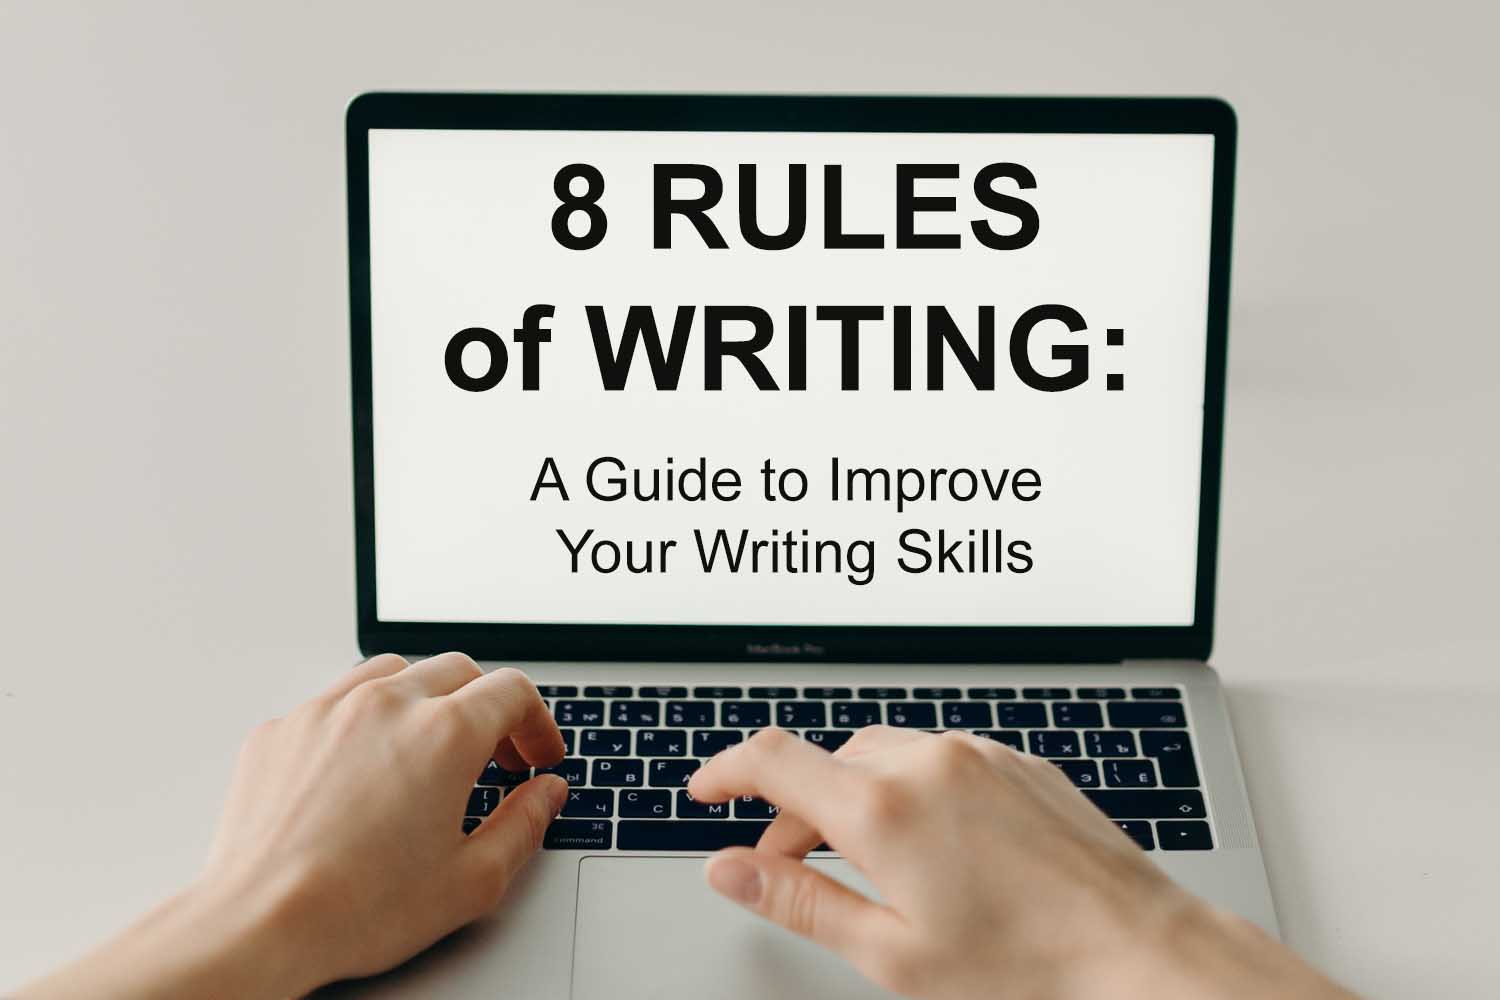 A Guide to Improve Your Writing Skills